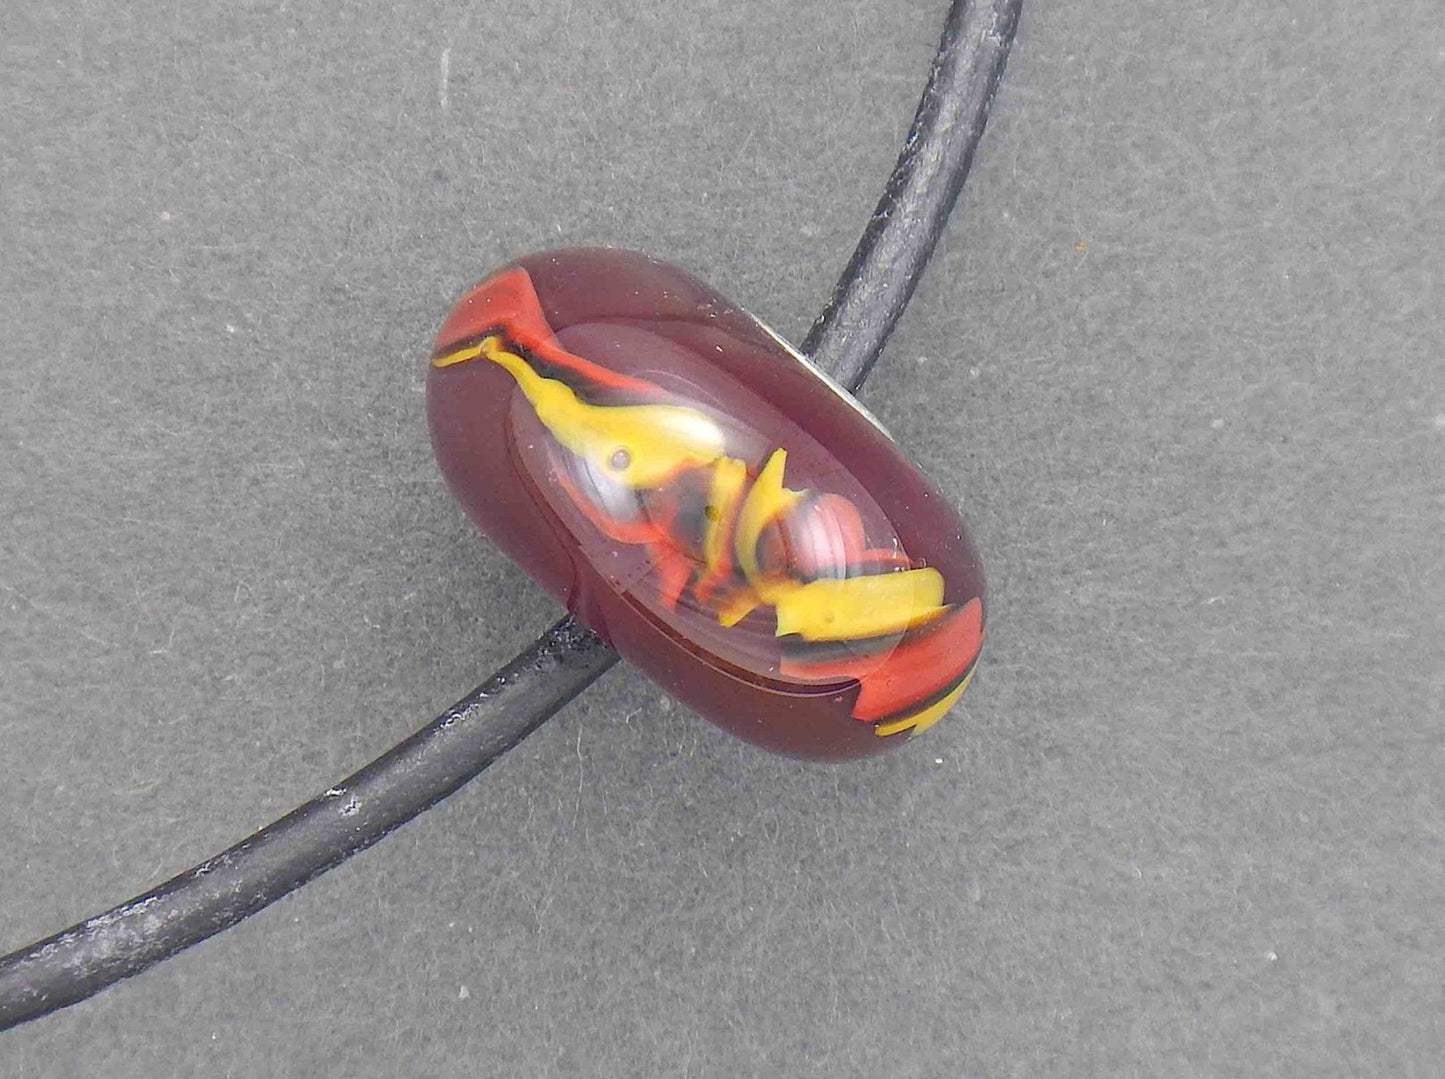 Choker necklace with burgundy red glass bead (Murano-style glass handmade in Montreal), red and yellow cane pattern, black leather cord, stainless steel clasp